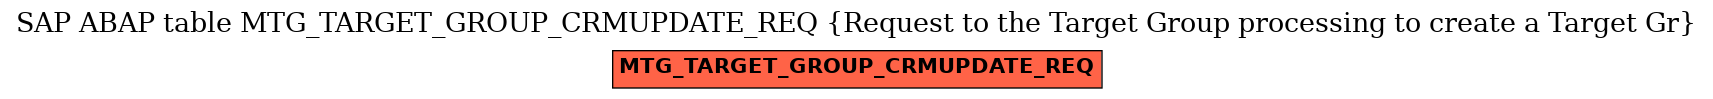 E-R Diagram for table MTG_TARGET_GROUP_CRMUPDATE_REQ (Request to the Target Group processing to create a Target Gr)